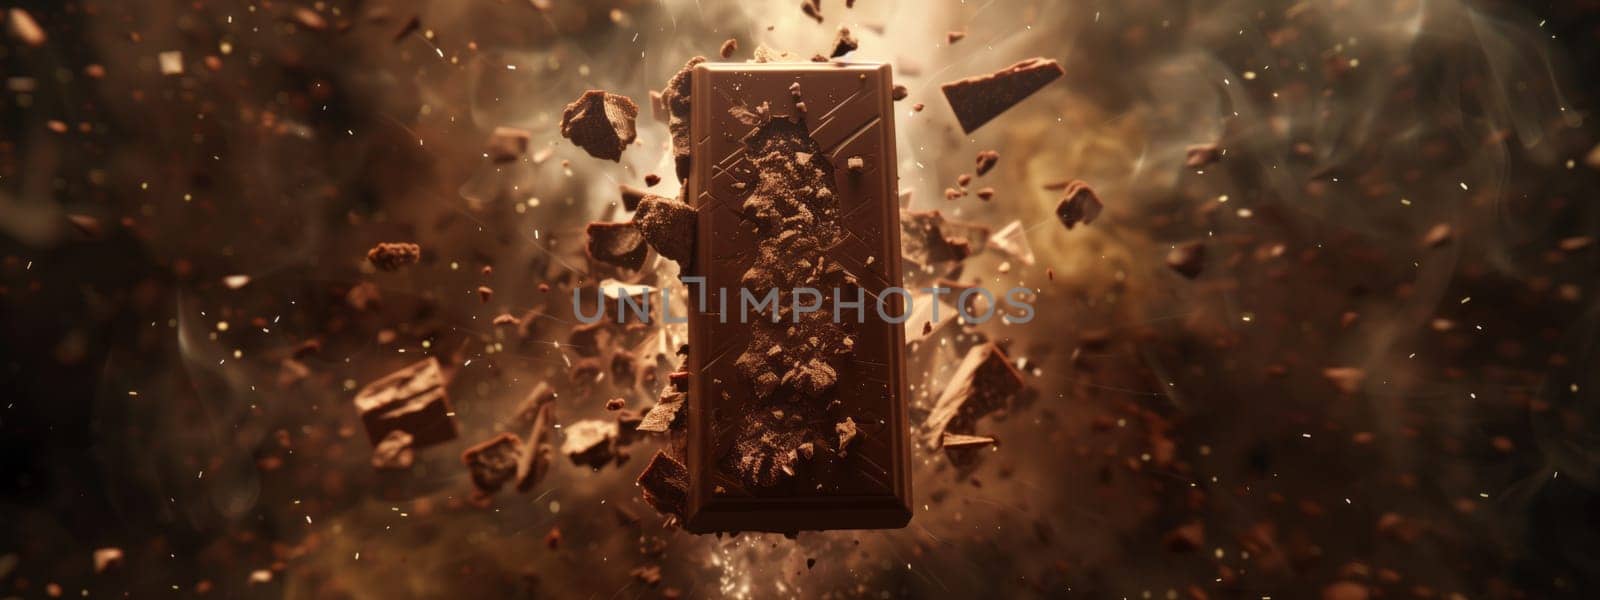 A chocolate bar is bursting in a dimly lit room, creating a woodsy scent by richwolf